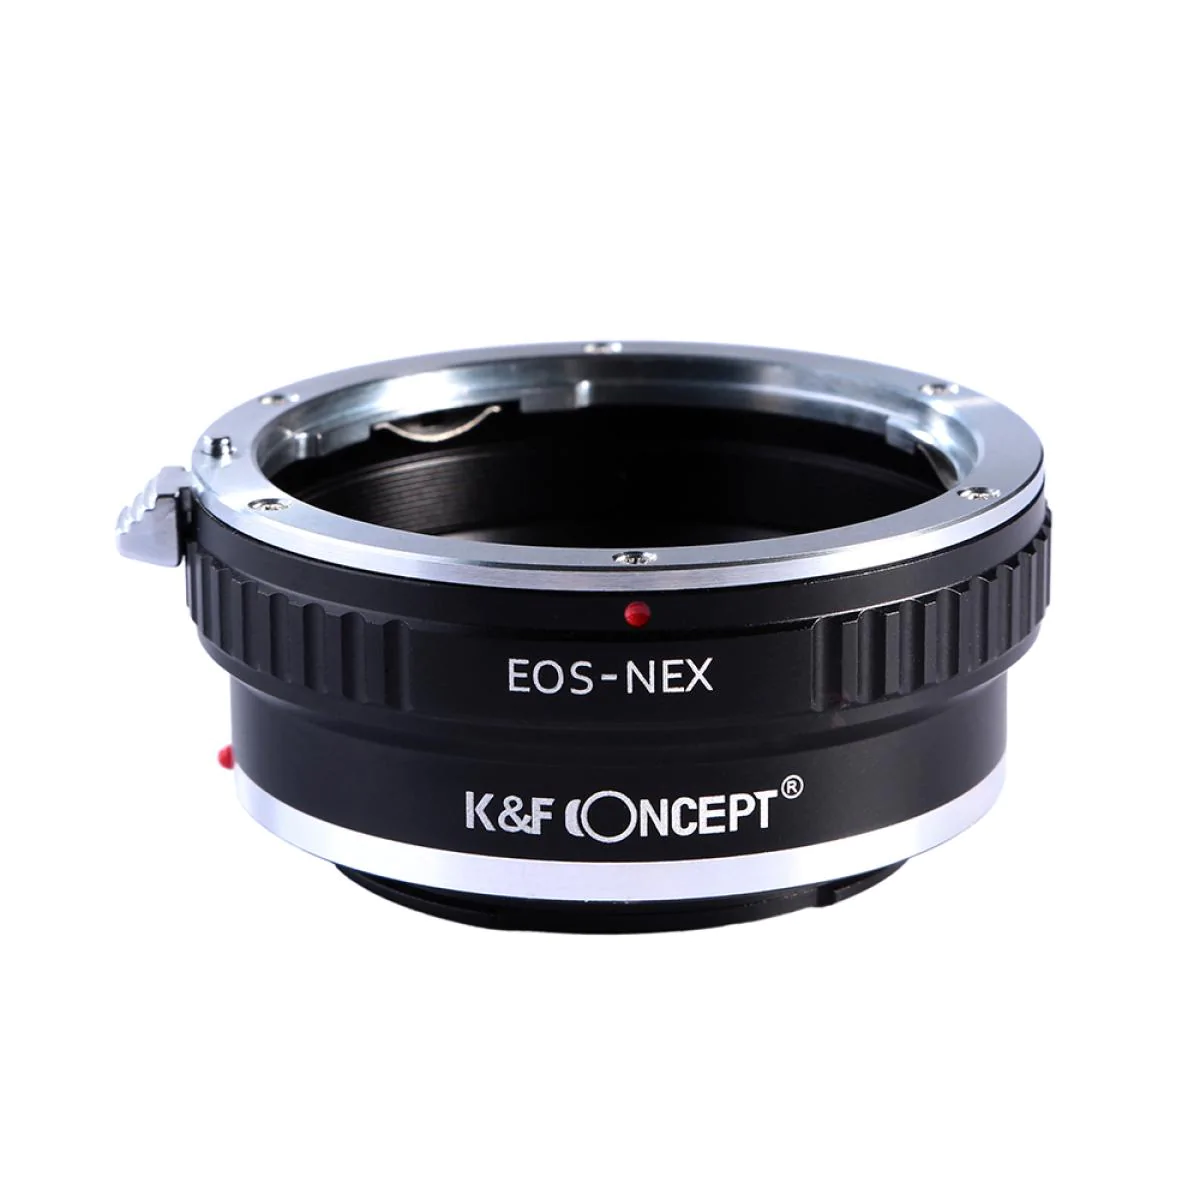 K&F Canon EF Lenses to Sony E Mount Camera Adapter K&F Concept Lens Mount Adapter